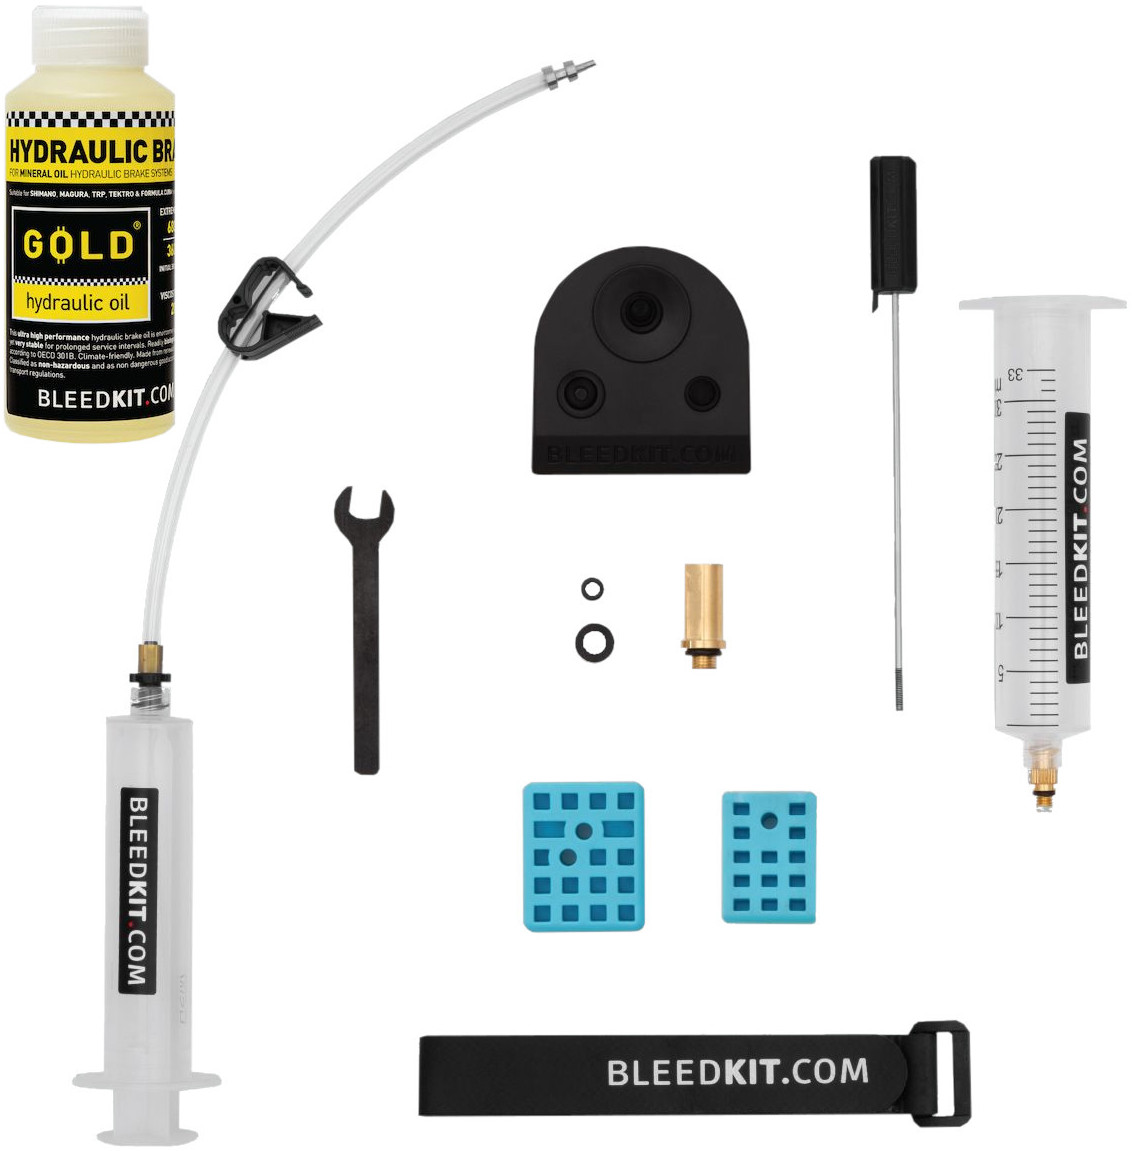 Picture of BLEEDKIT.COM Premium Road Gold Edition Bleeding Kit including Gold Oil for hydraulic Shimano Road Bike Brakes